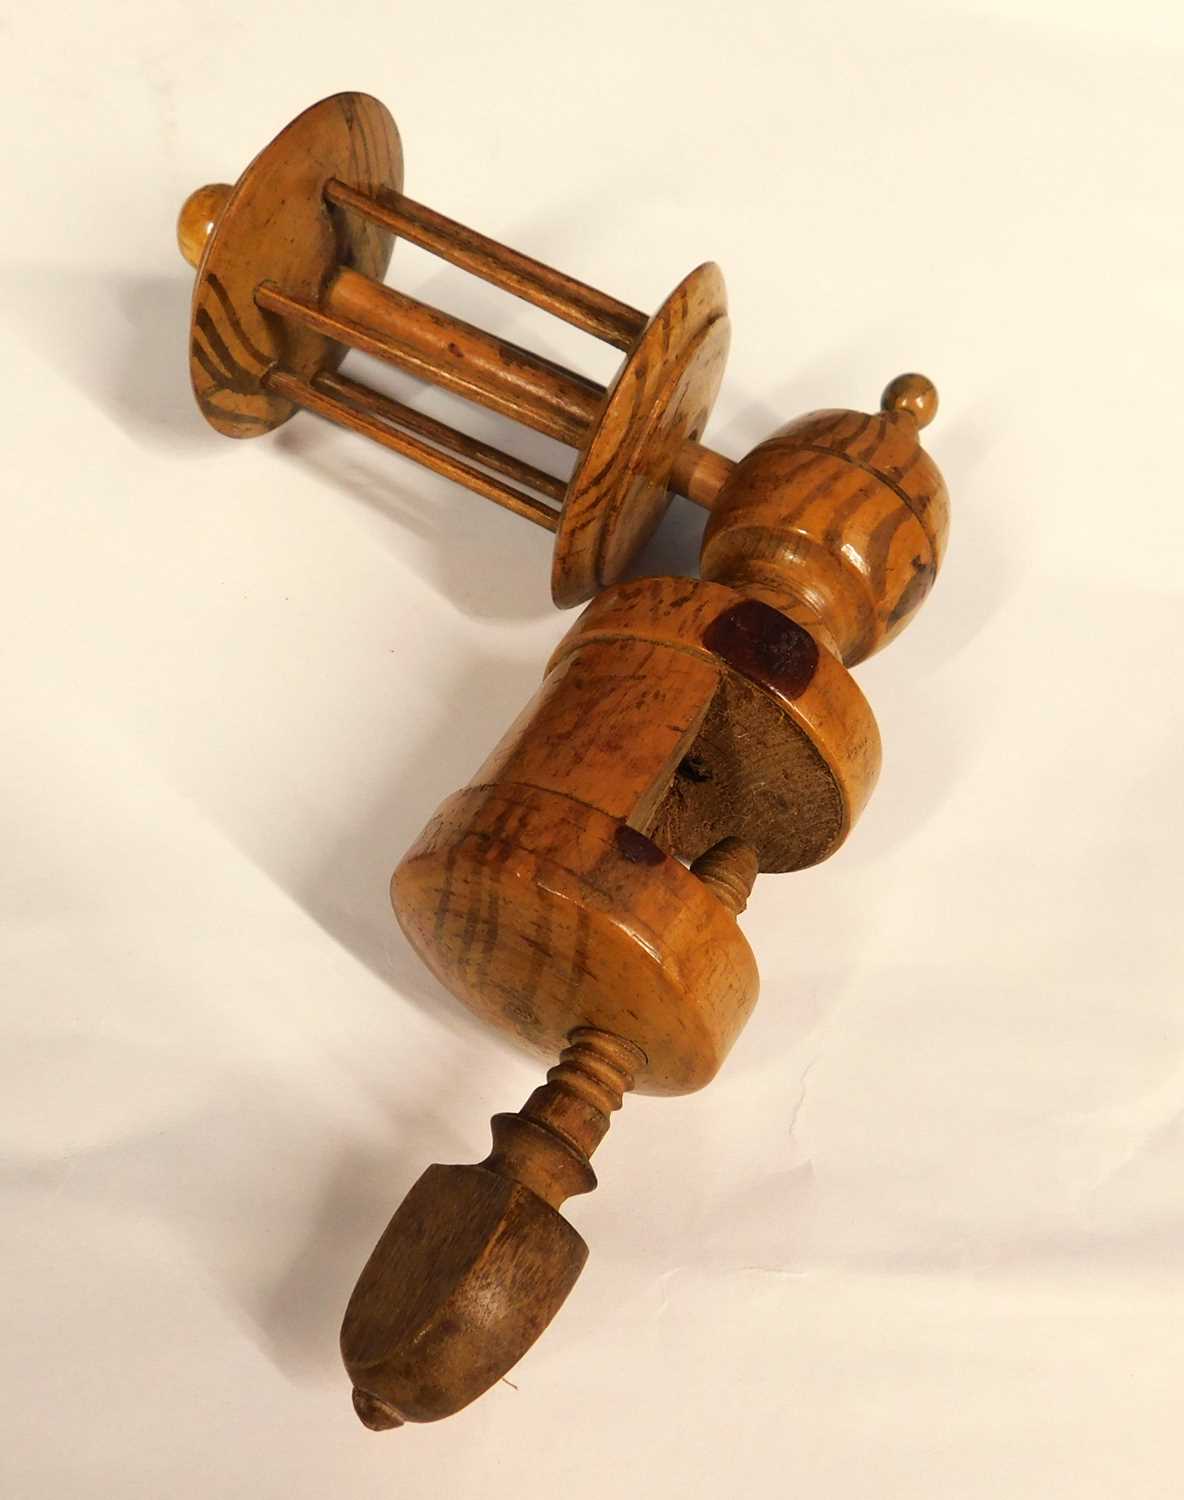 A 19th century fruitwood sewing clamp / thread winder, approx. 17 x 14cm